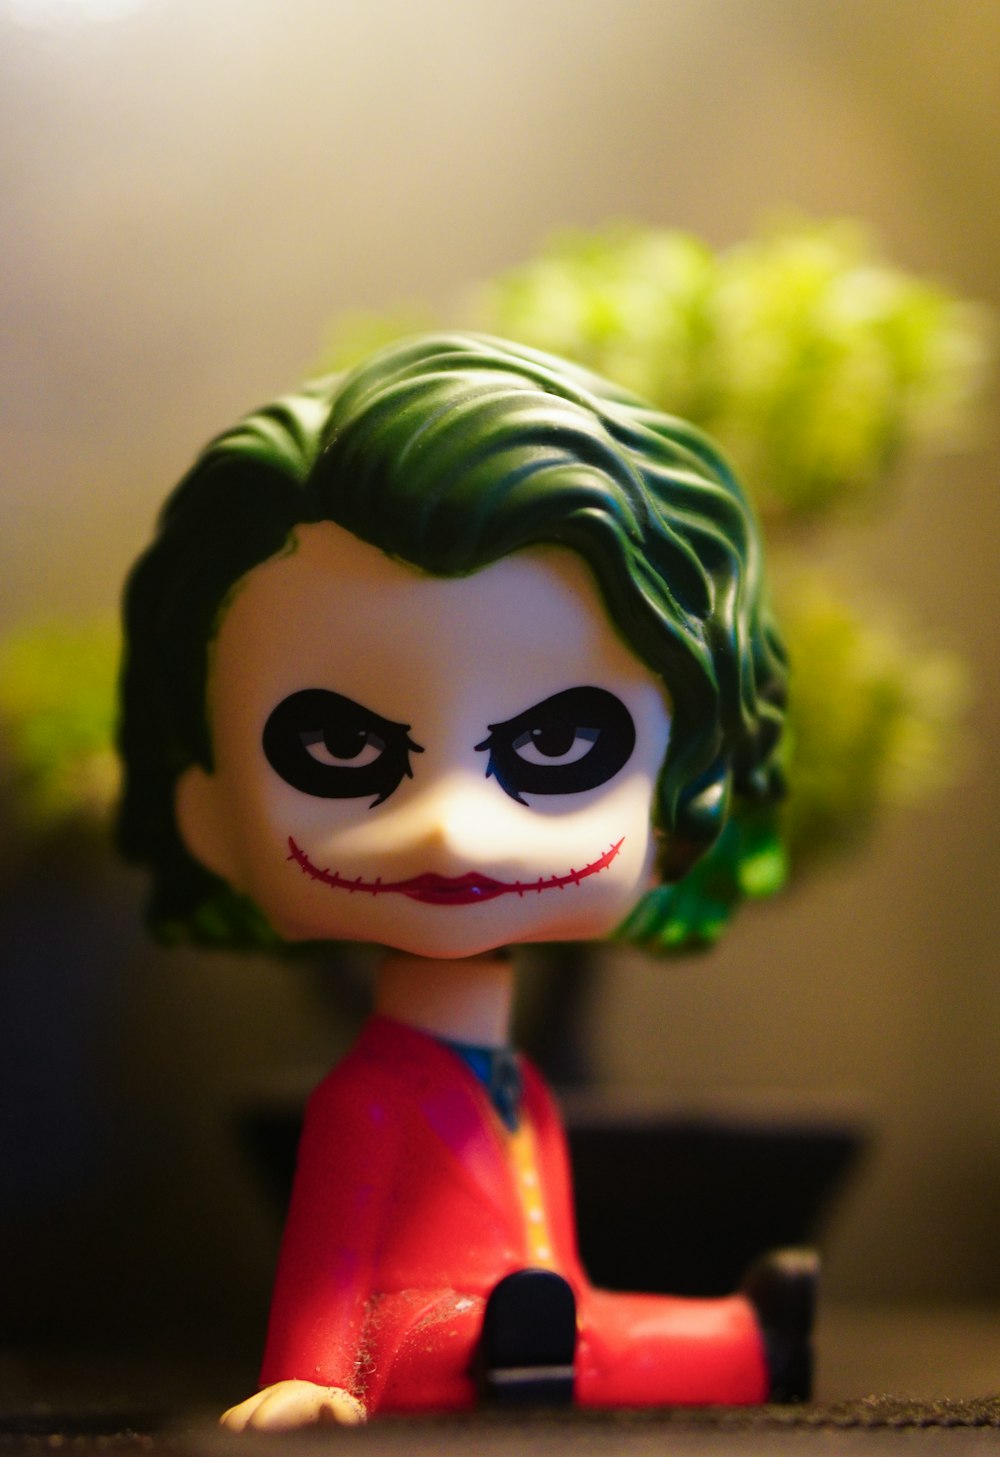 a close up of a toy with a green hair